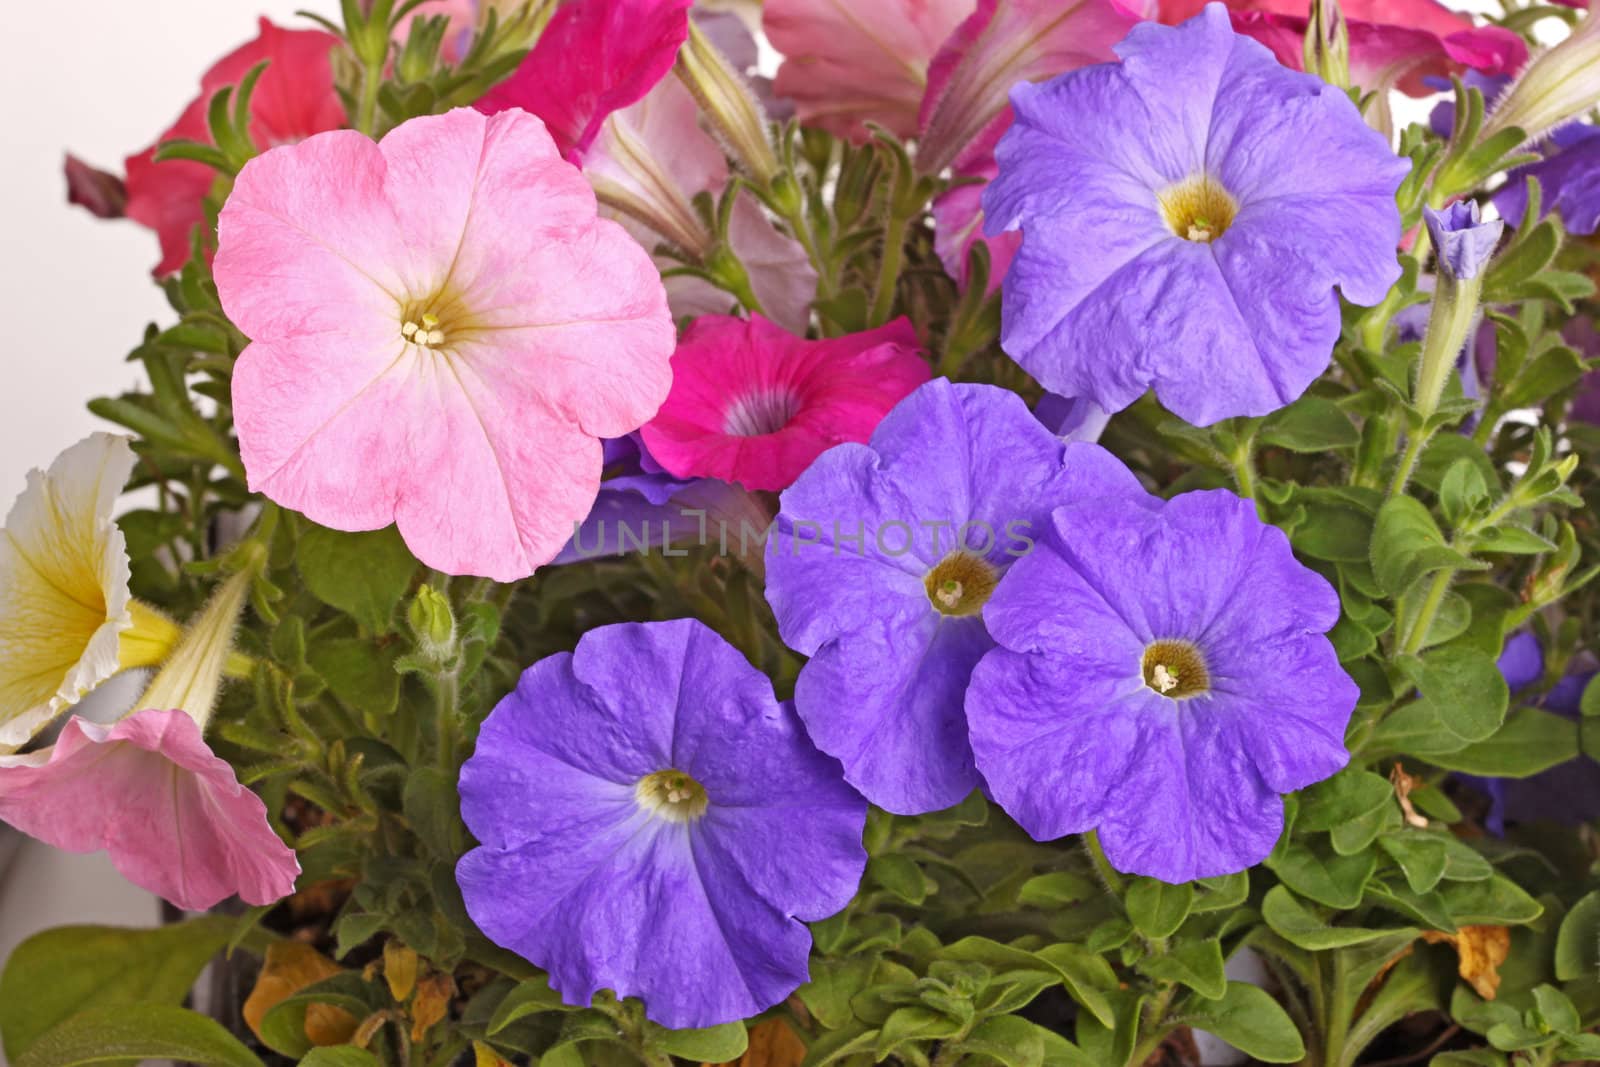 Multiple flowers of pink, purple and red petunias (Petunia hybrida) fill the frame